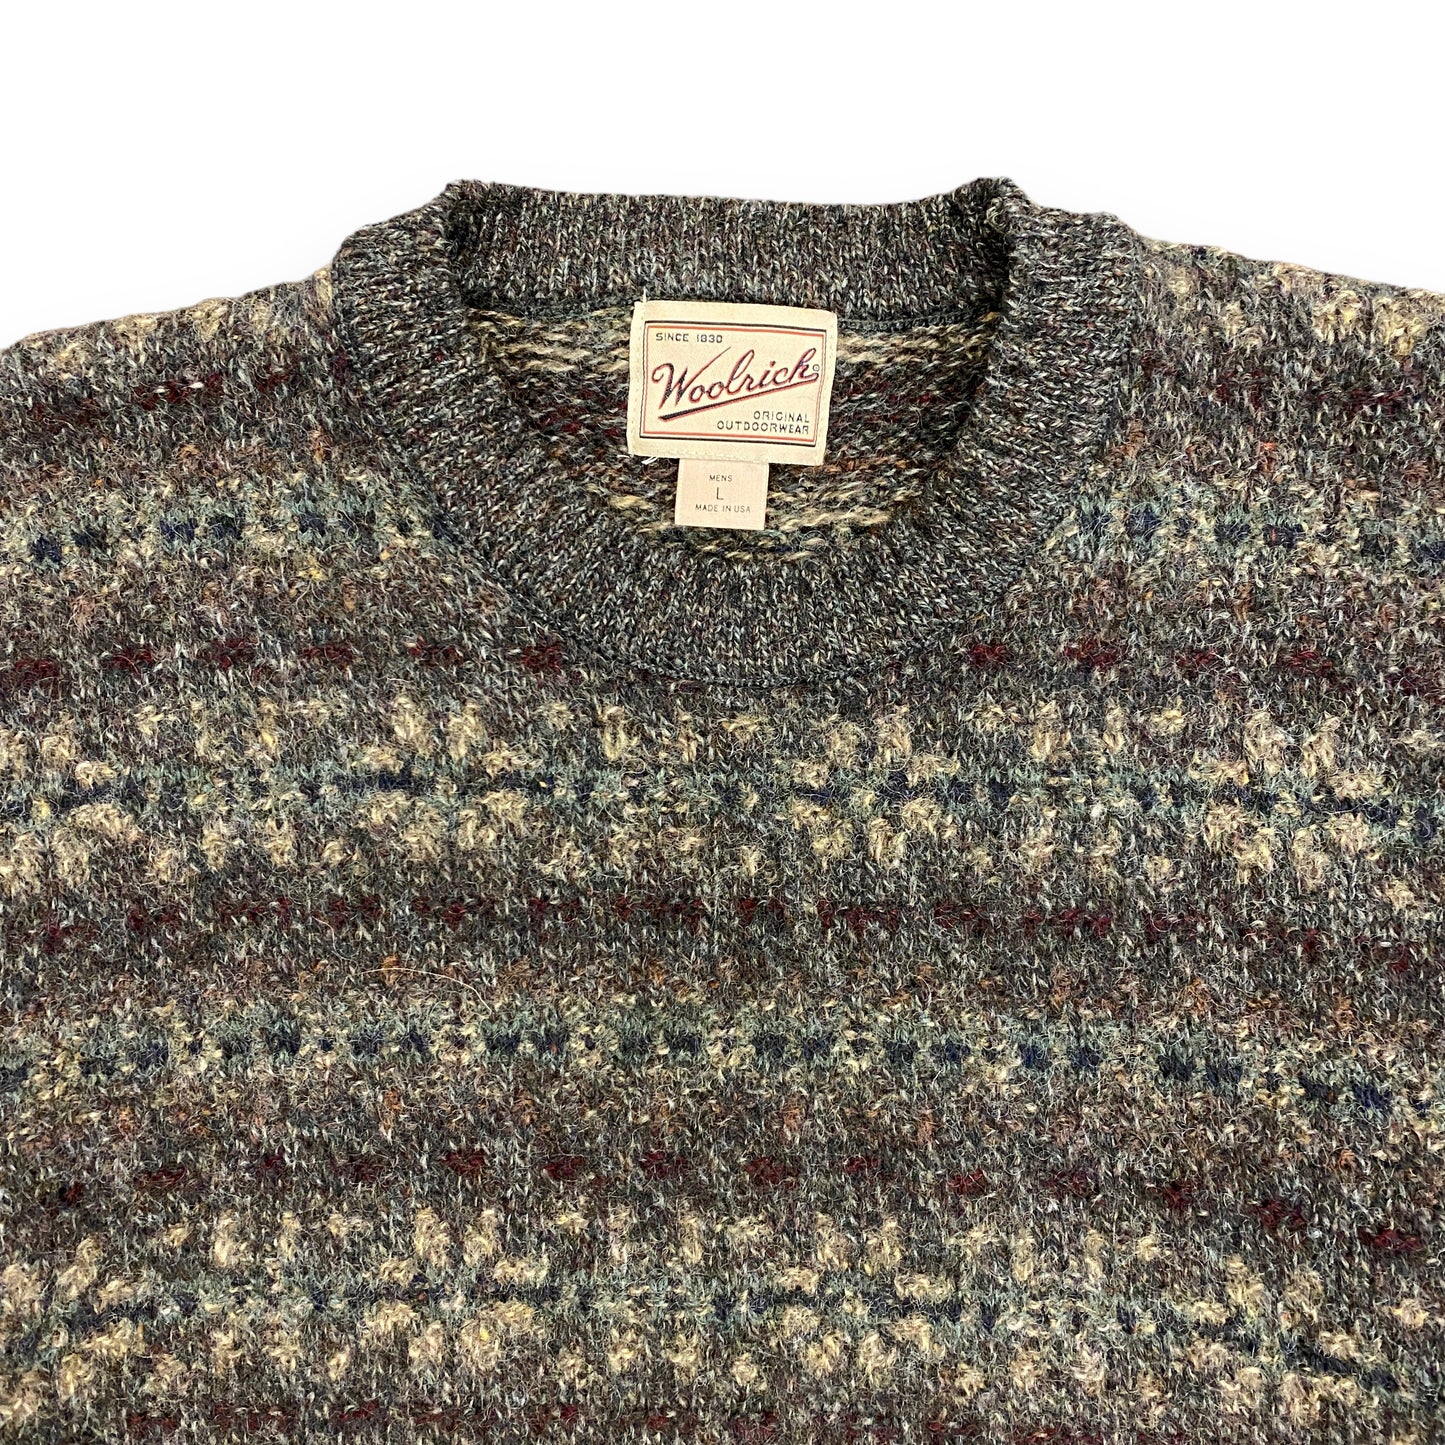 Vintage Woolrich Made in the USA Wool Sweater - Size Large